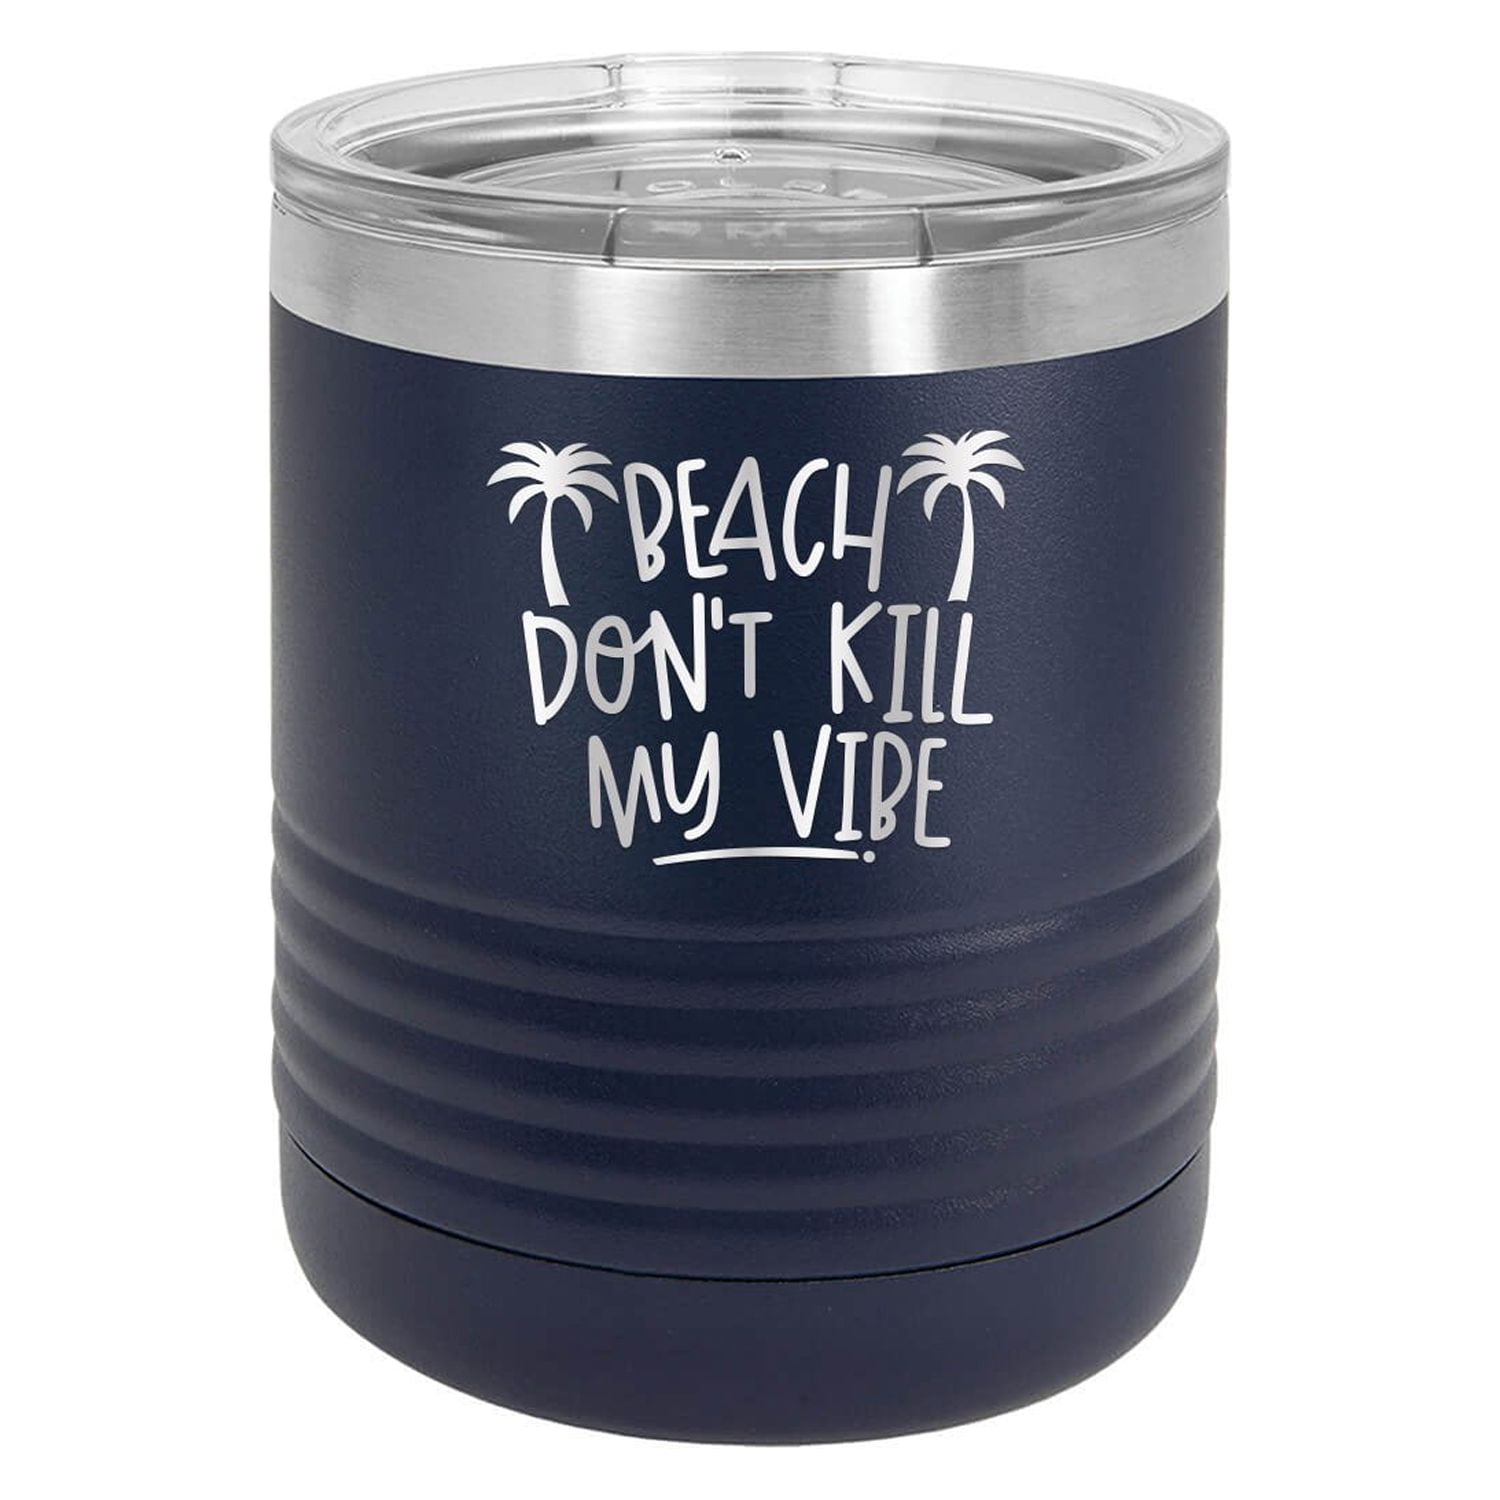 Beach Don't Kill My Vibe - Engraved 10 oz Tumbler Cup Unique Funny Birthday  Gift Graduation Gifts for Men Women Beach Sand Sun Beaches Summer Outdoors  (10 Ring, Navy 